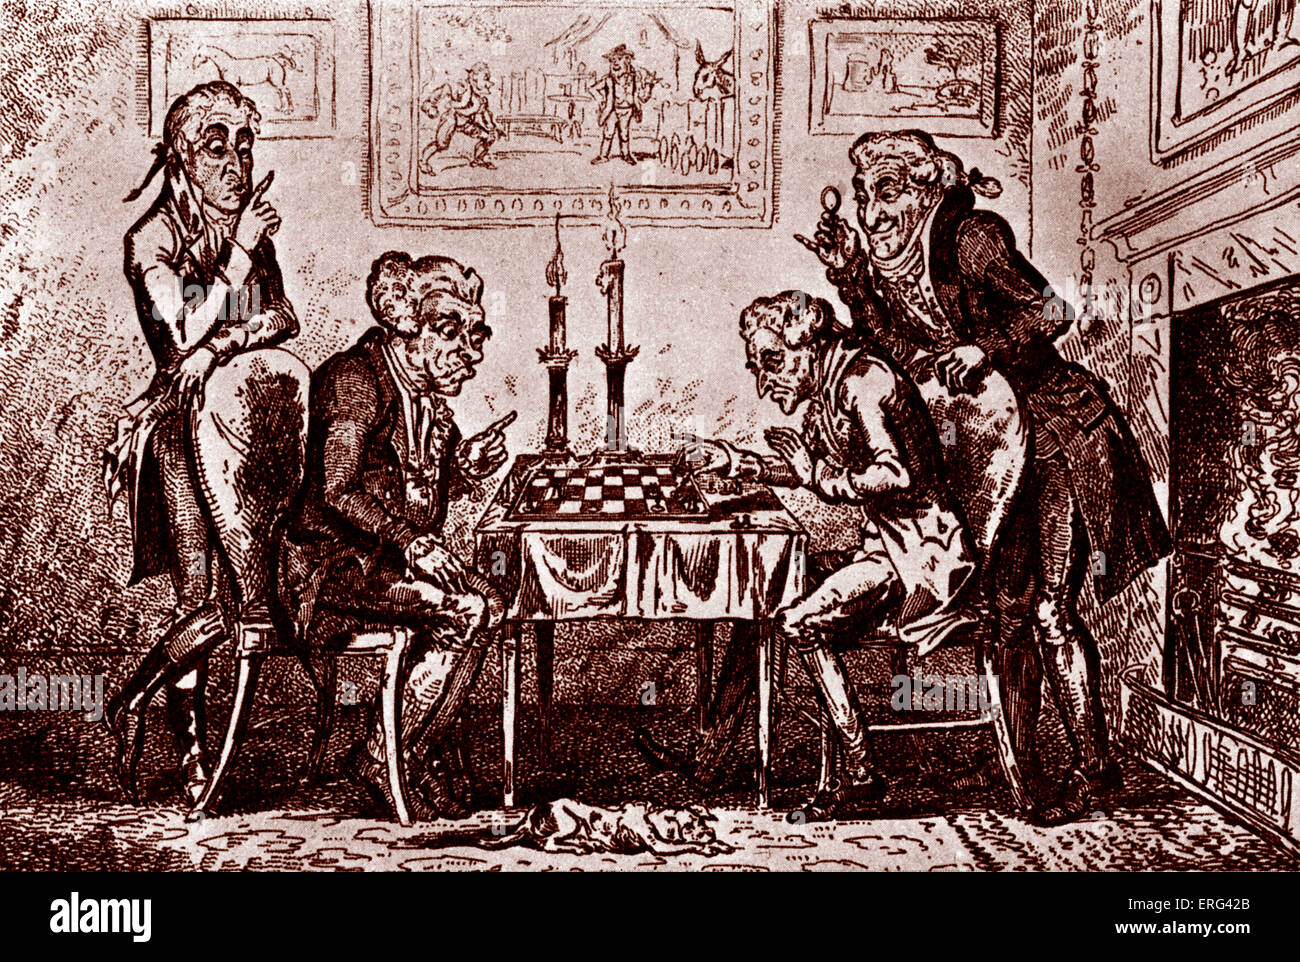 A Game of Chess, caricature by George Cruikshank 1835. GC: 1792- 1878. Tinted version. Stock Photo